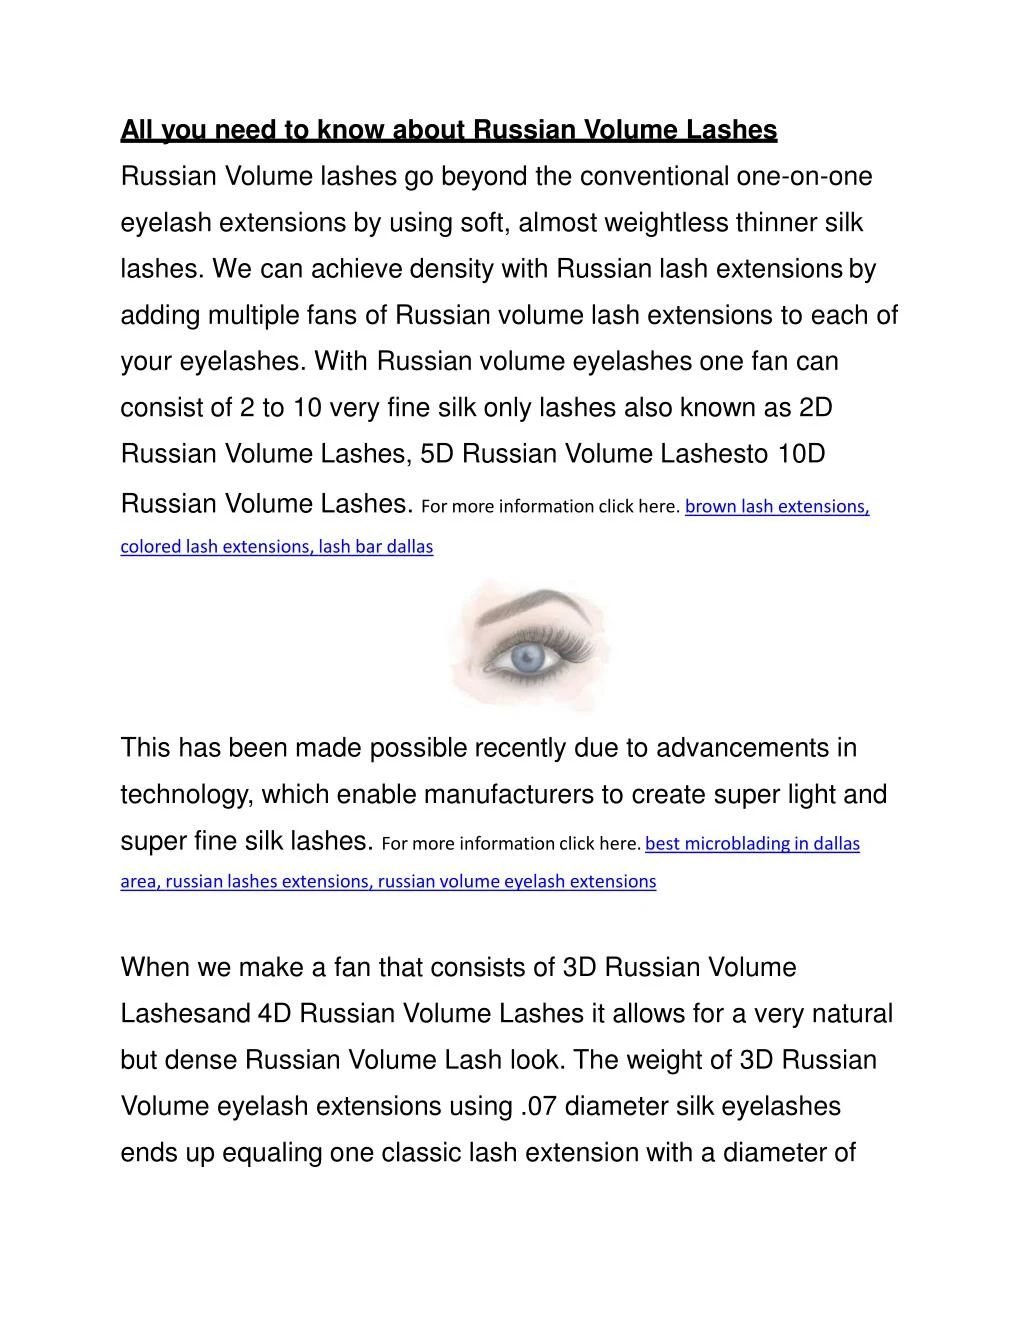 all you need to know about russian volume lashes